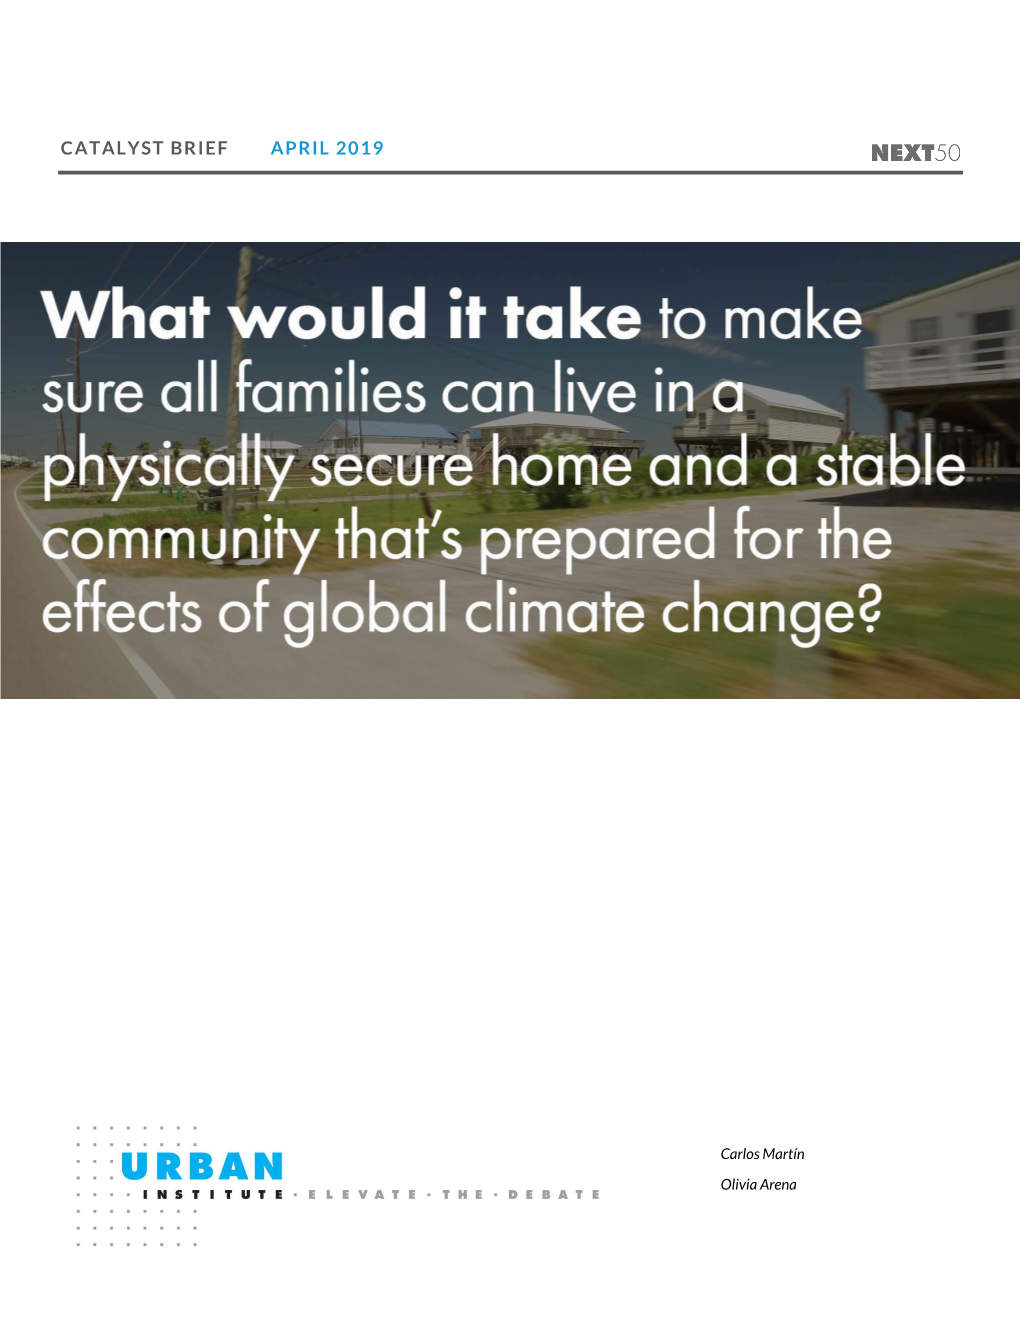 What Would It Take to Make Sure All Families Can Live in a Physically Secure Home and a Stable Community That’S Prepared for the Effects of Global Climate Change?